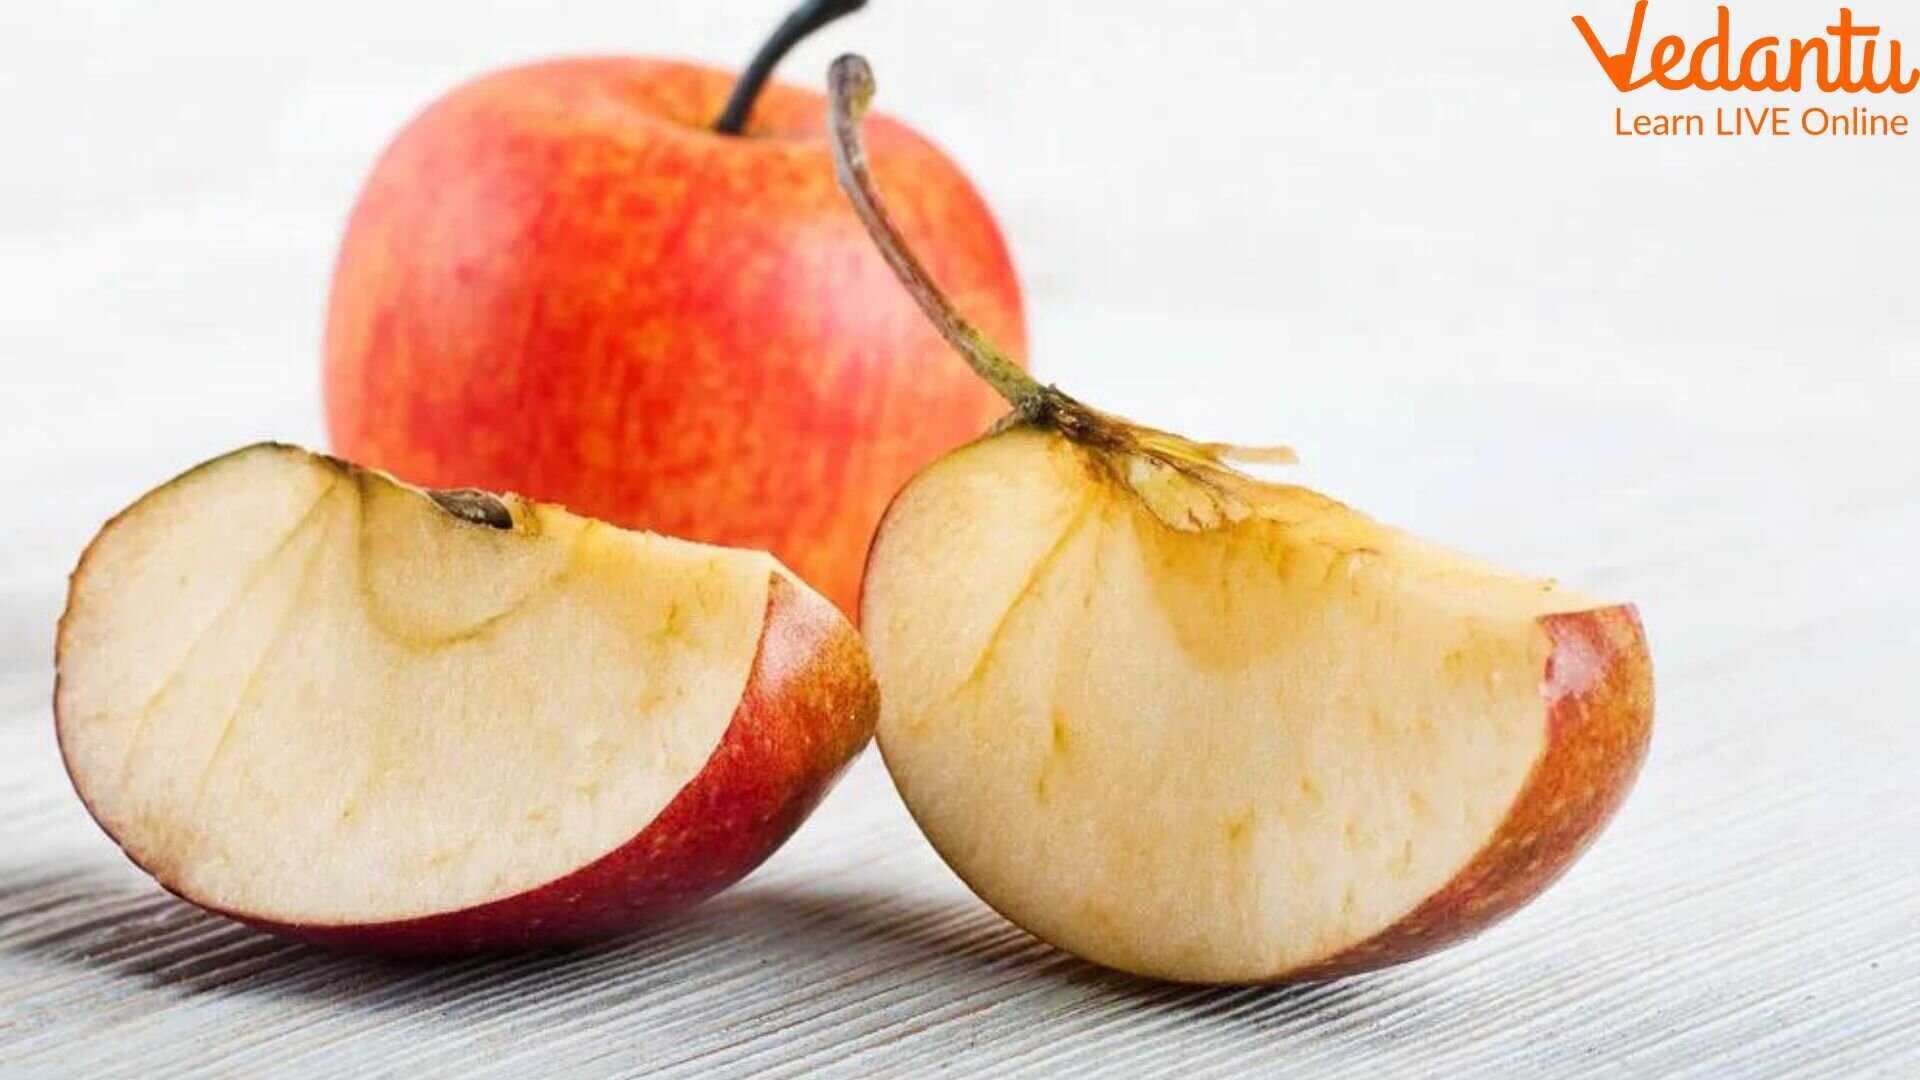 Oxidation in Apple